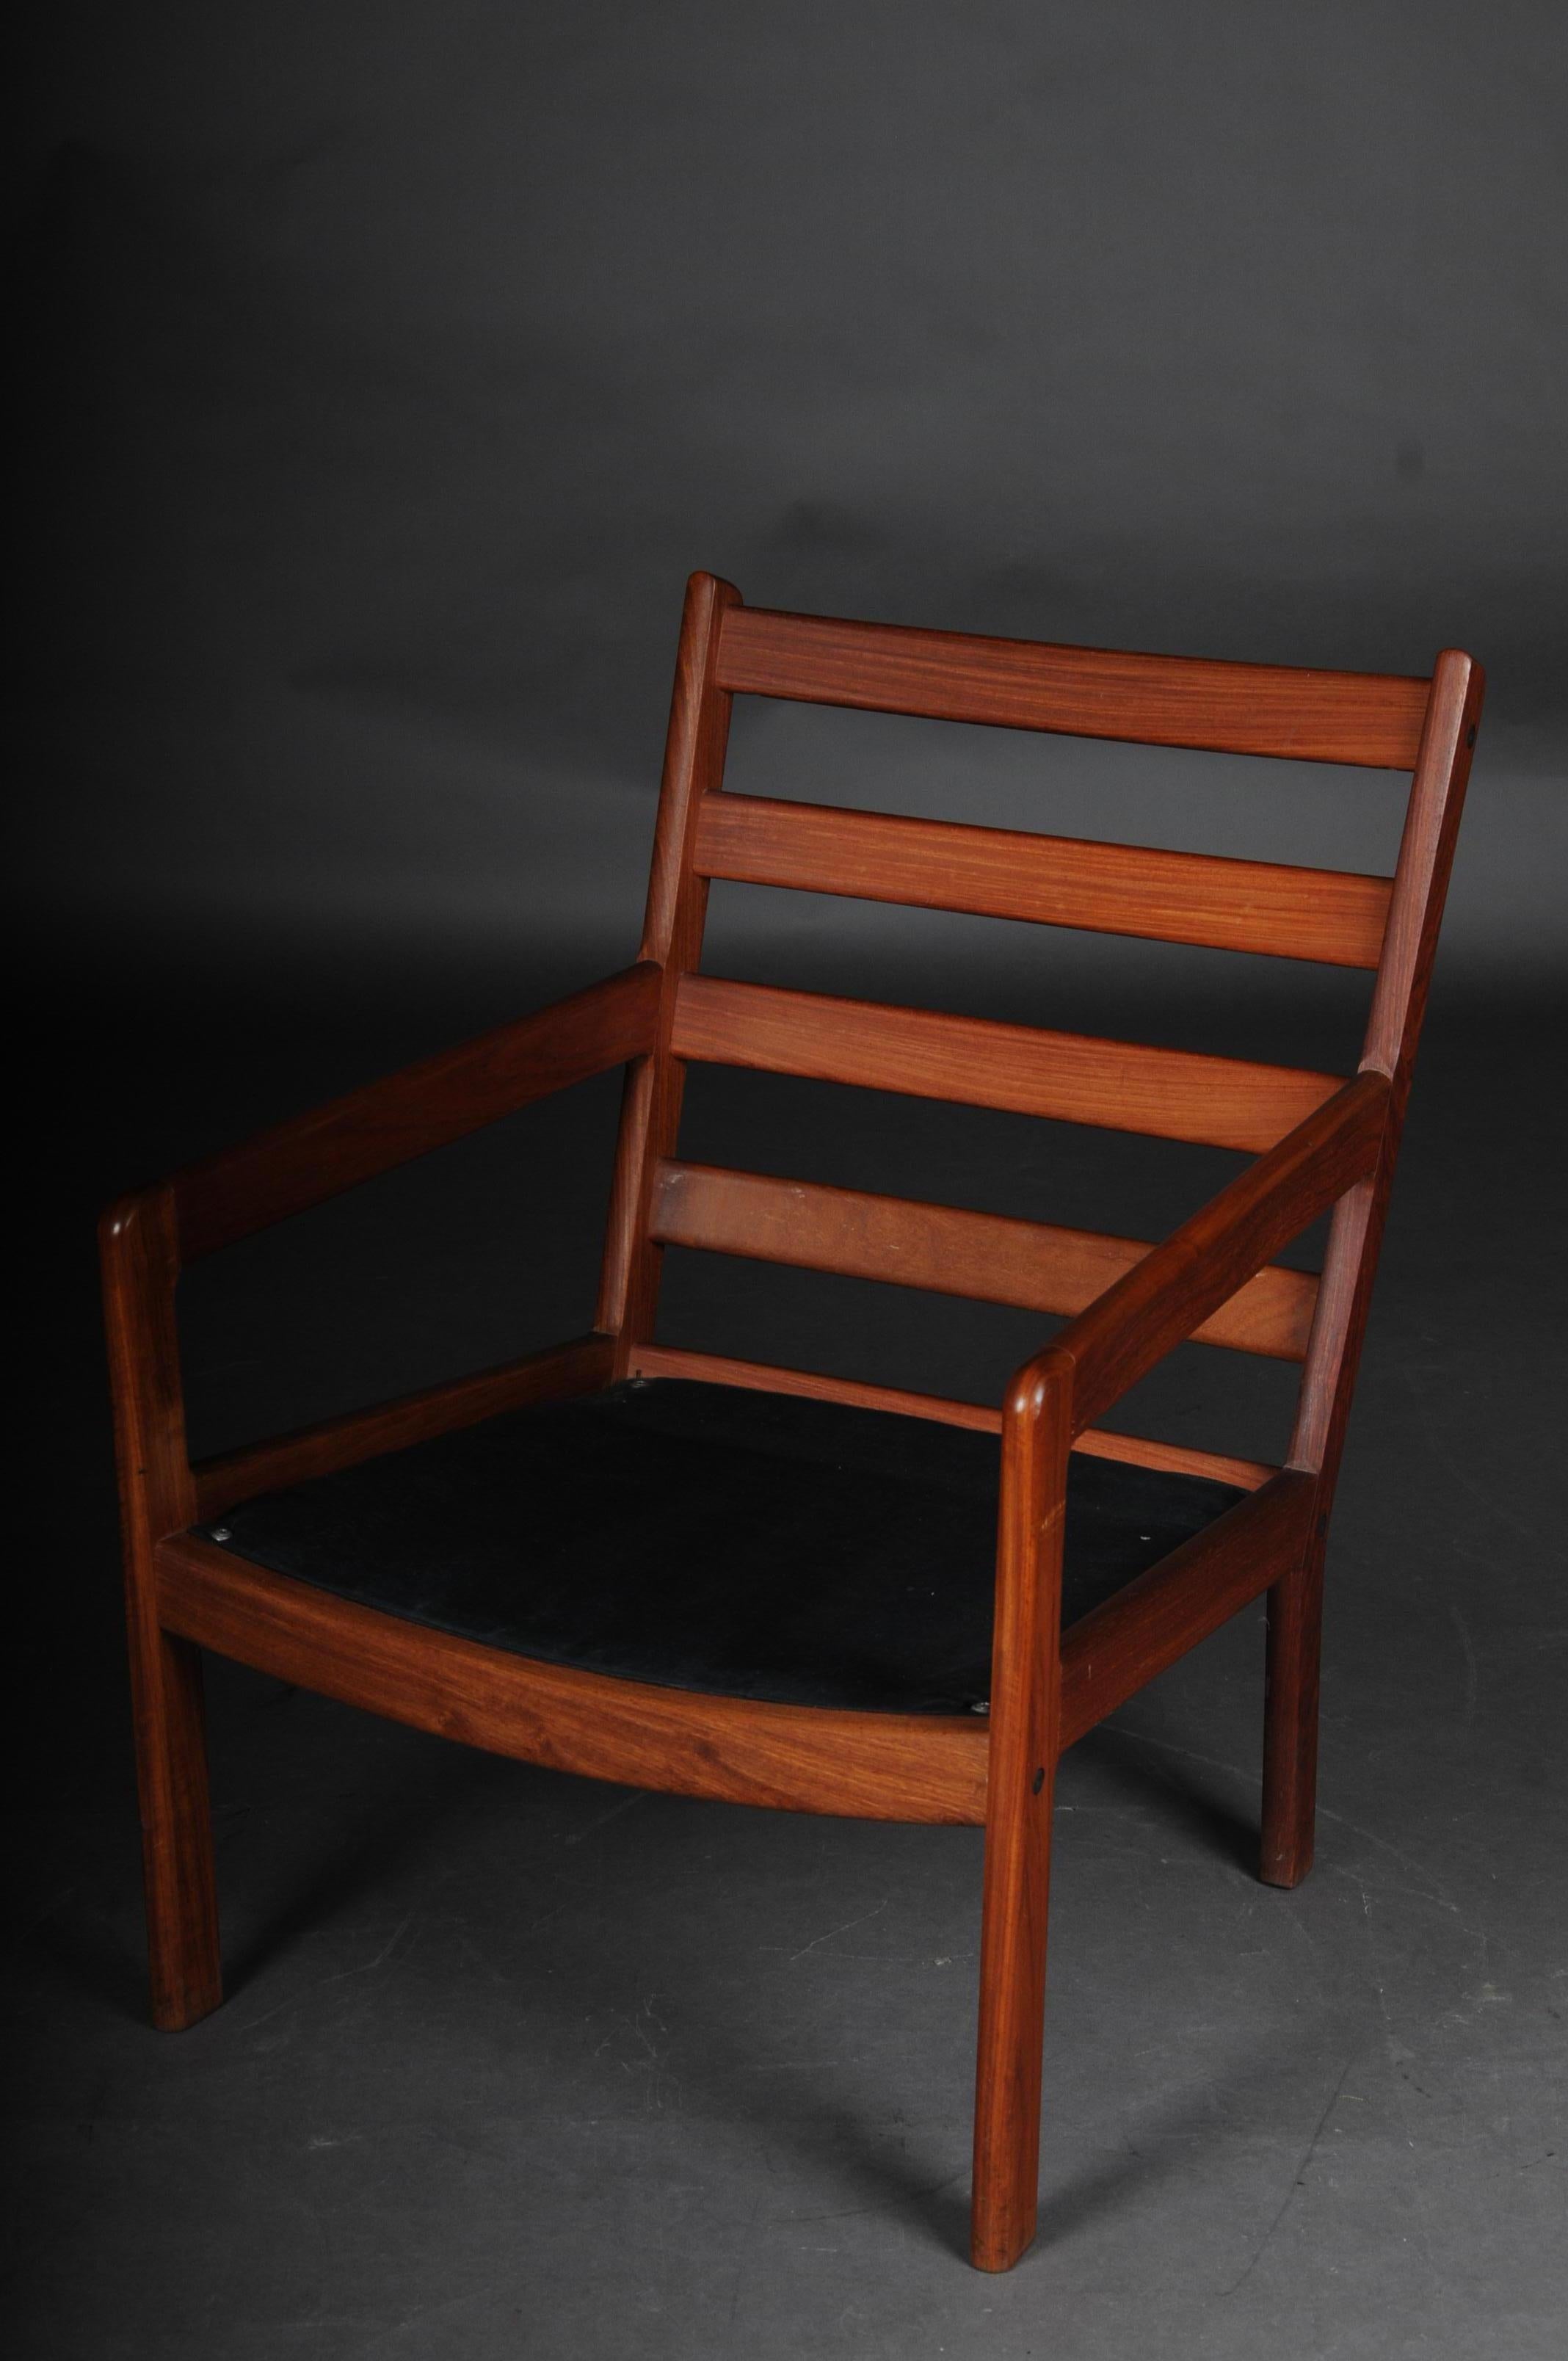 Pair of Vintage Teak Armchairs, Chairs, 1960s-1970s, Danish For Sale 5